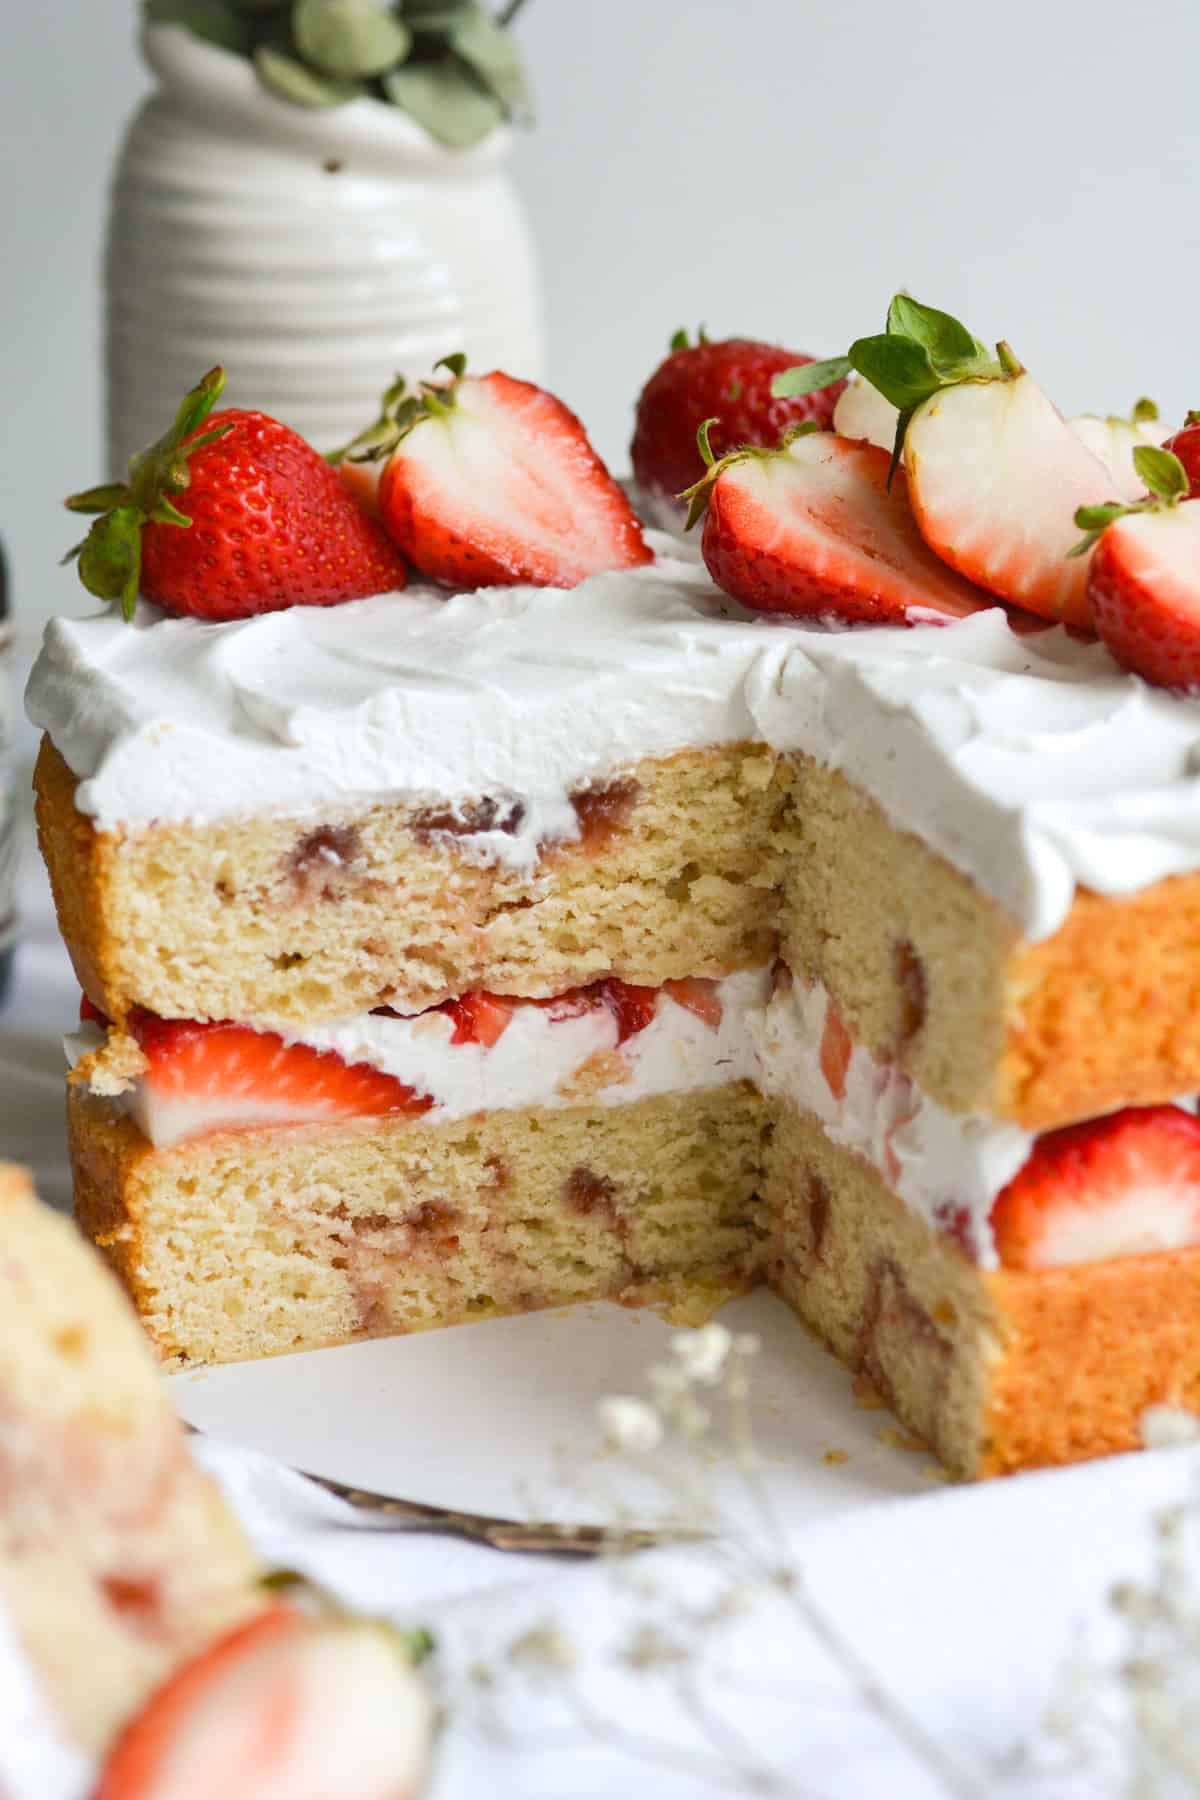 Vegan Strawberry Shortcake Cake with slices taken out of it to show the middle of the cake. Its topped with vegan whipped cream and strawberries.